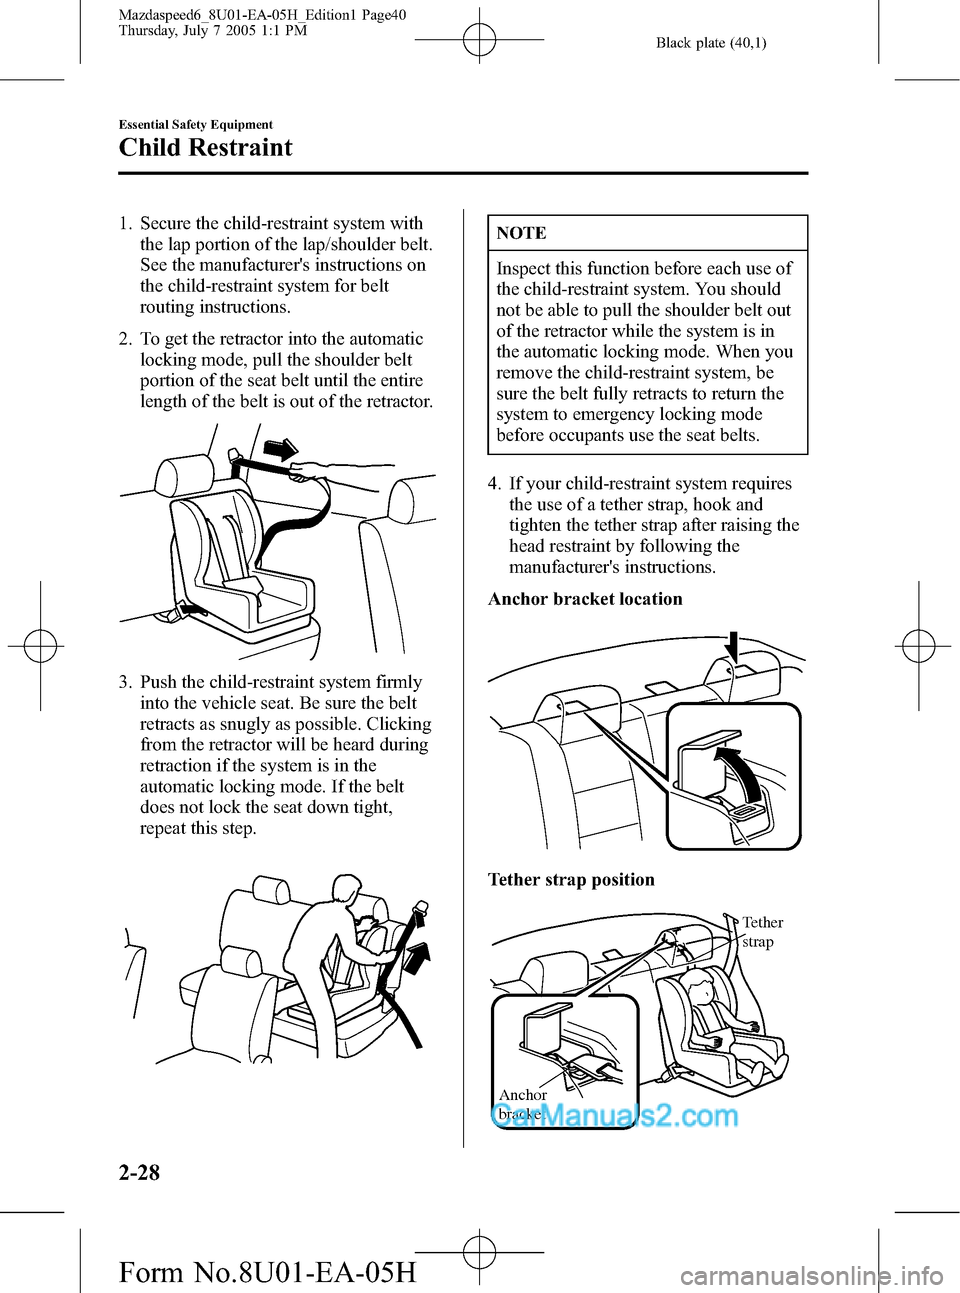 MAZDA MODEL MAZDASPEED 6 2006   (in English) Owners Guide Black plate (40,1)
1. Secure the child-restraint system with
the lap portion of the lap/shoulder belt.
See the manufacturers instructions on
the child-restraint system for belt
routing instructions.
